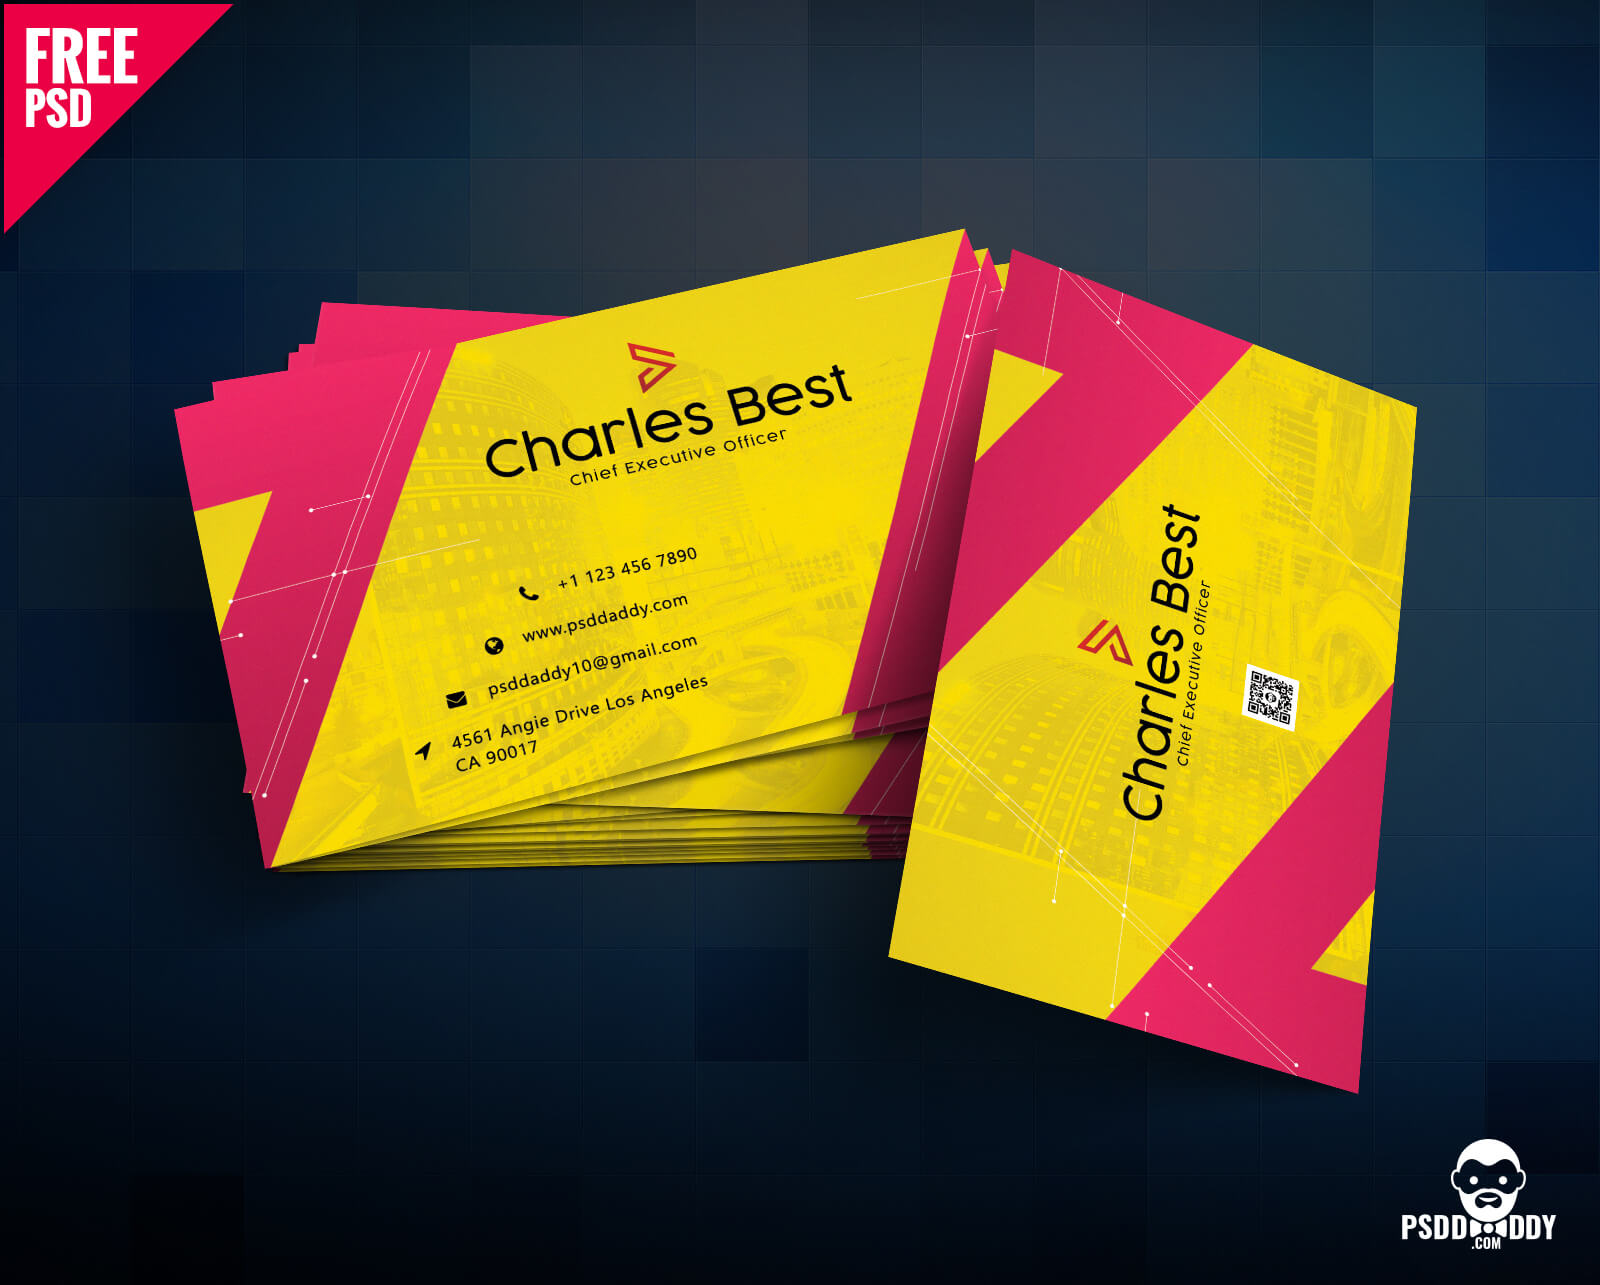 Download] Creative Business Card Free Psd | Psddaddy Intended For Business Card Template Photoshop Cs6